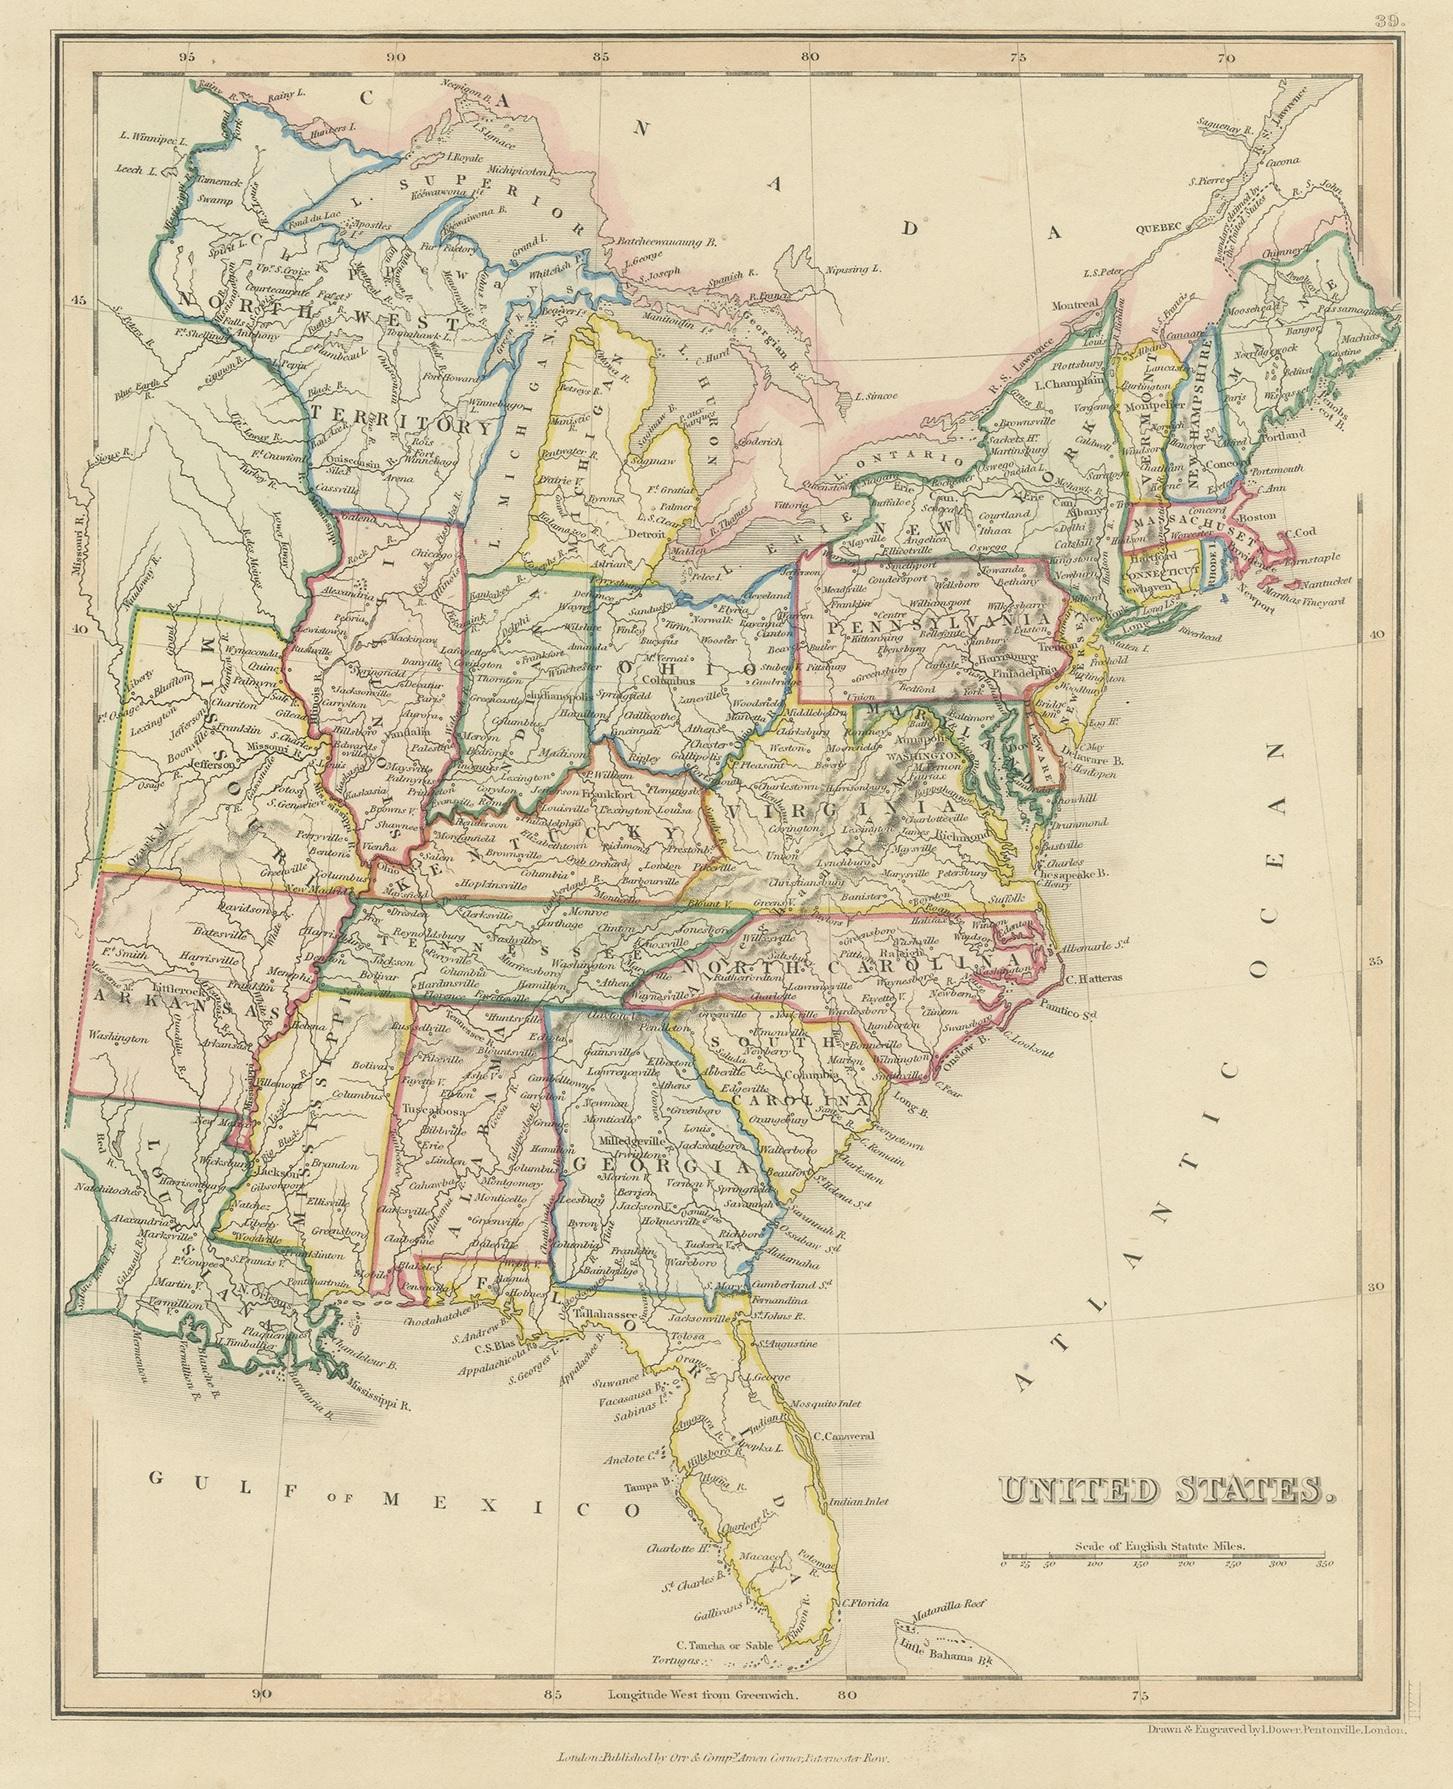 Antique map titled 'United States'. Old map of the United States, includes the last part of the North West Territory (present day Wisconsin and part of Minnesota). It also marks Ft. Crawford at the confluence of the Mississippi River and the